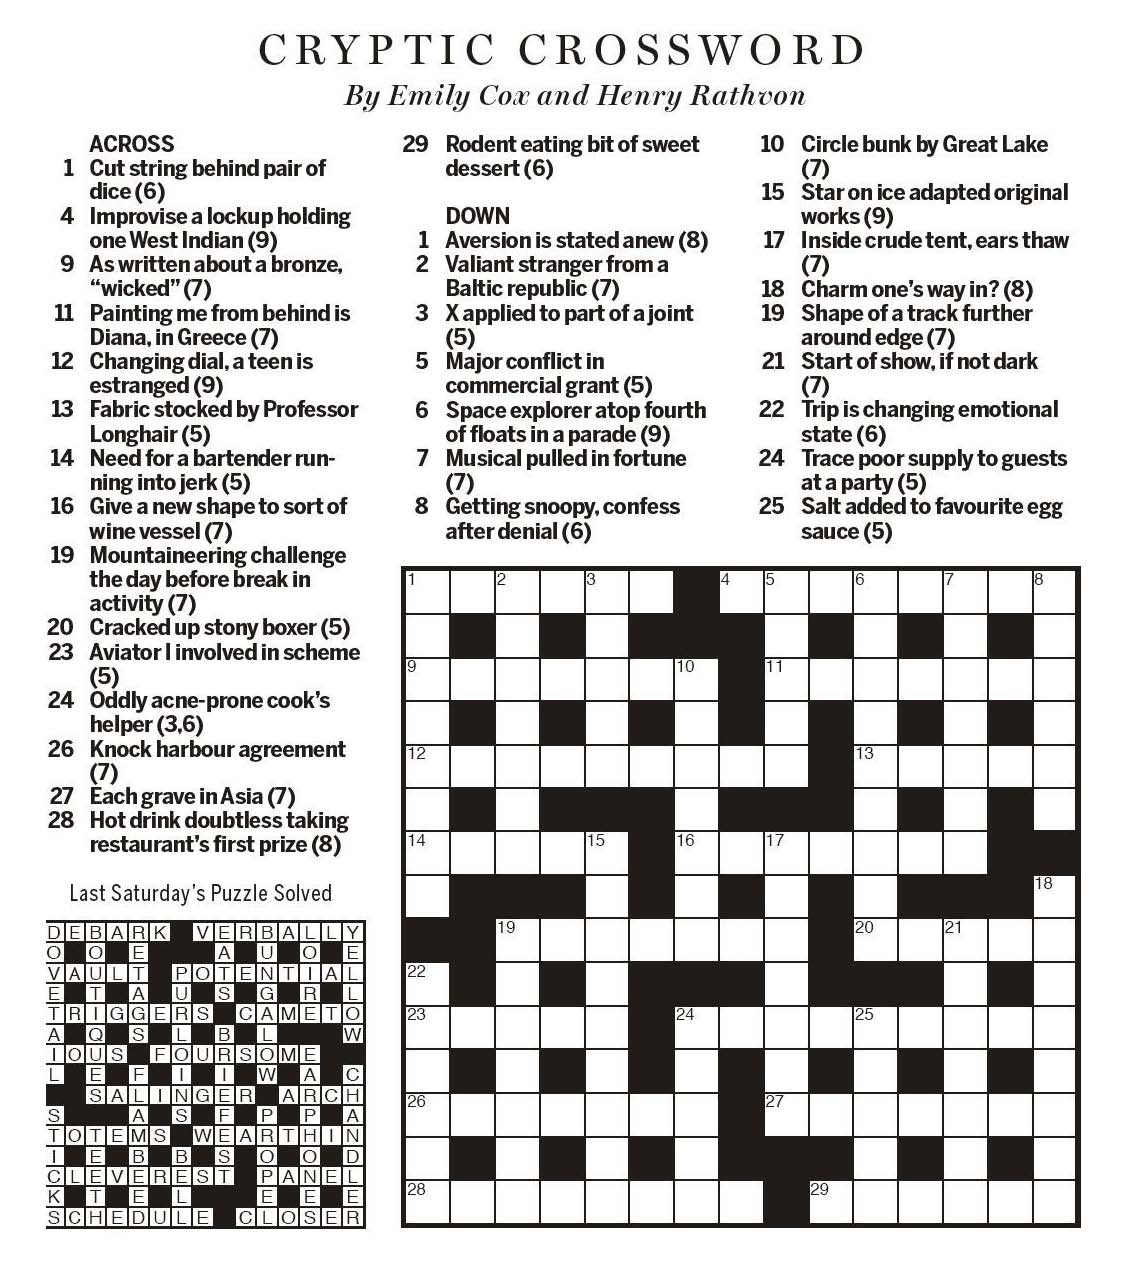 national-post-cryptic-crossword-forum-saturday-may-21-2016-getting